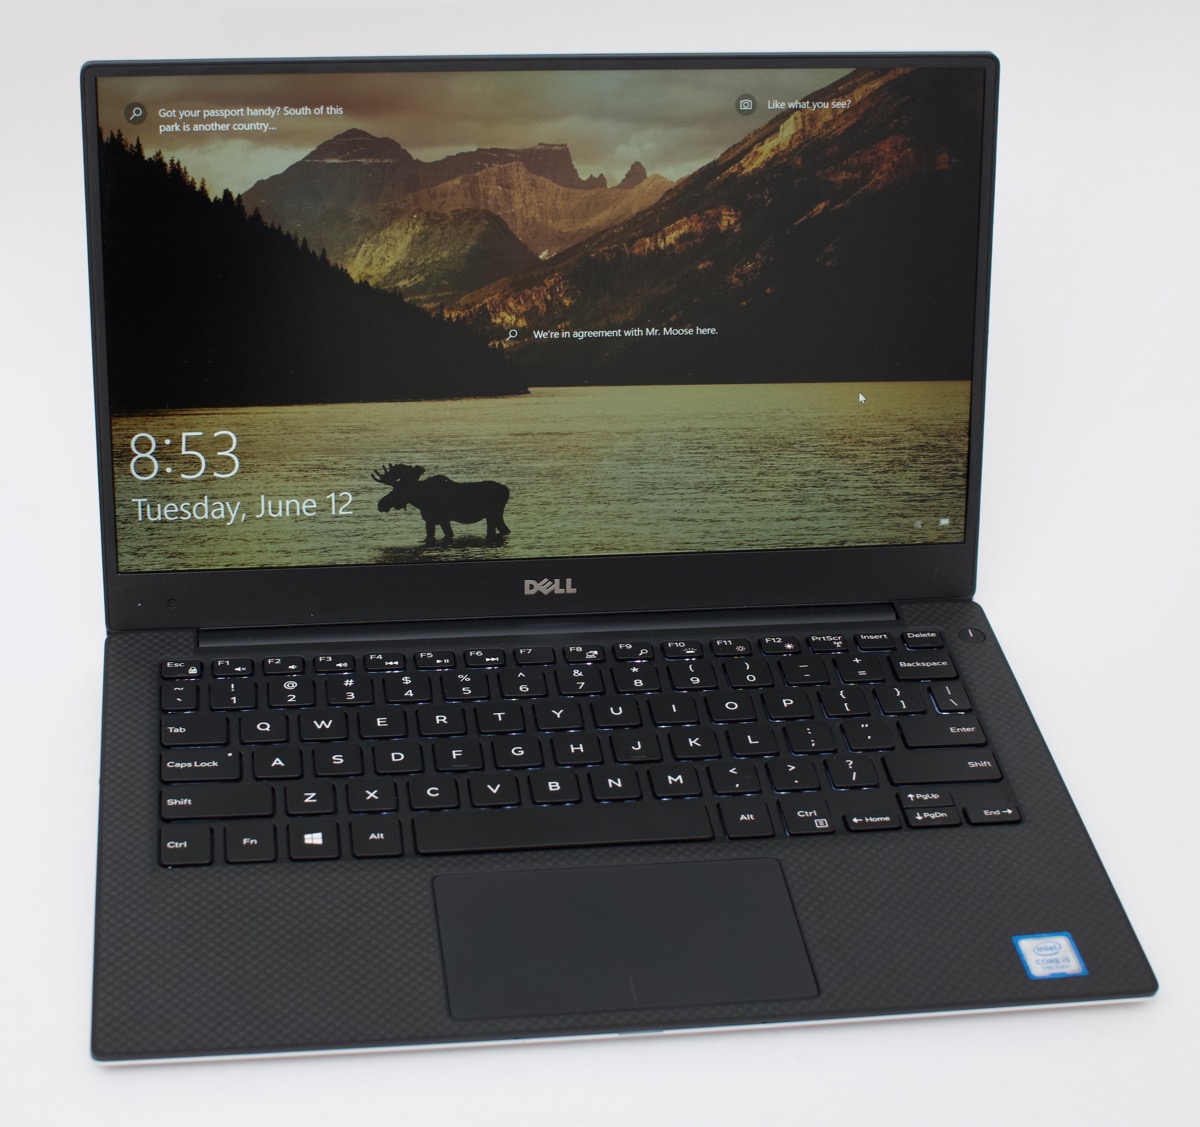 Mac Os For Dell Xps 2012